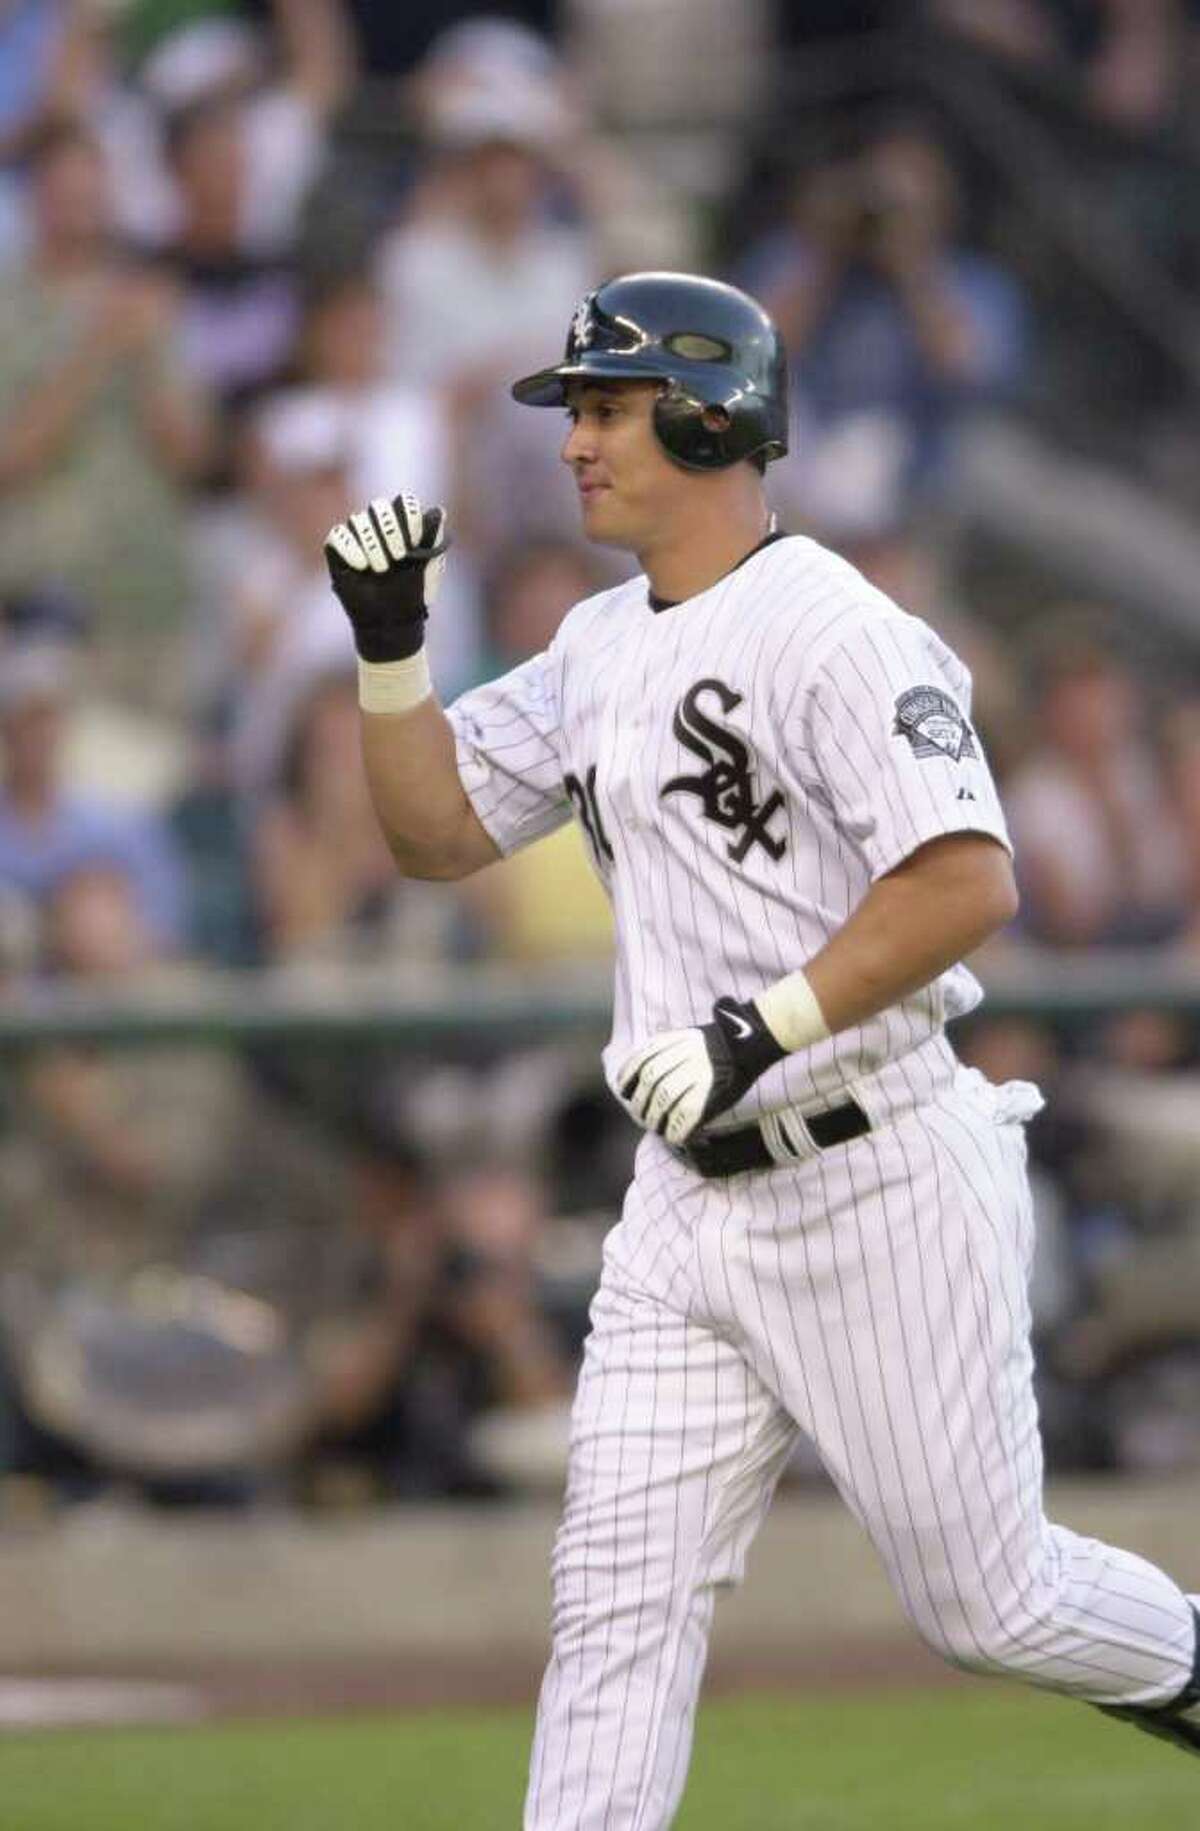 10 Jul 2001: Magglio Ordonez of the Chicago White Sox celebrates his home run during the 2001 Major League Baseball All-Star Game at Safeco Field in Seattle, Washington. DIGITAL IMAGE. Mandatory Credit: Otto Greule/Allsport